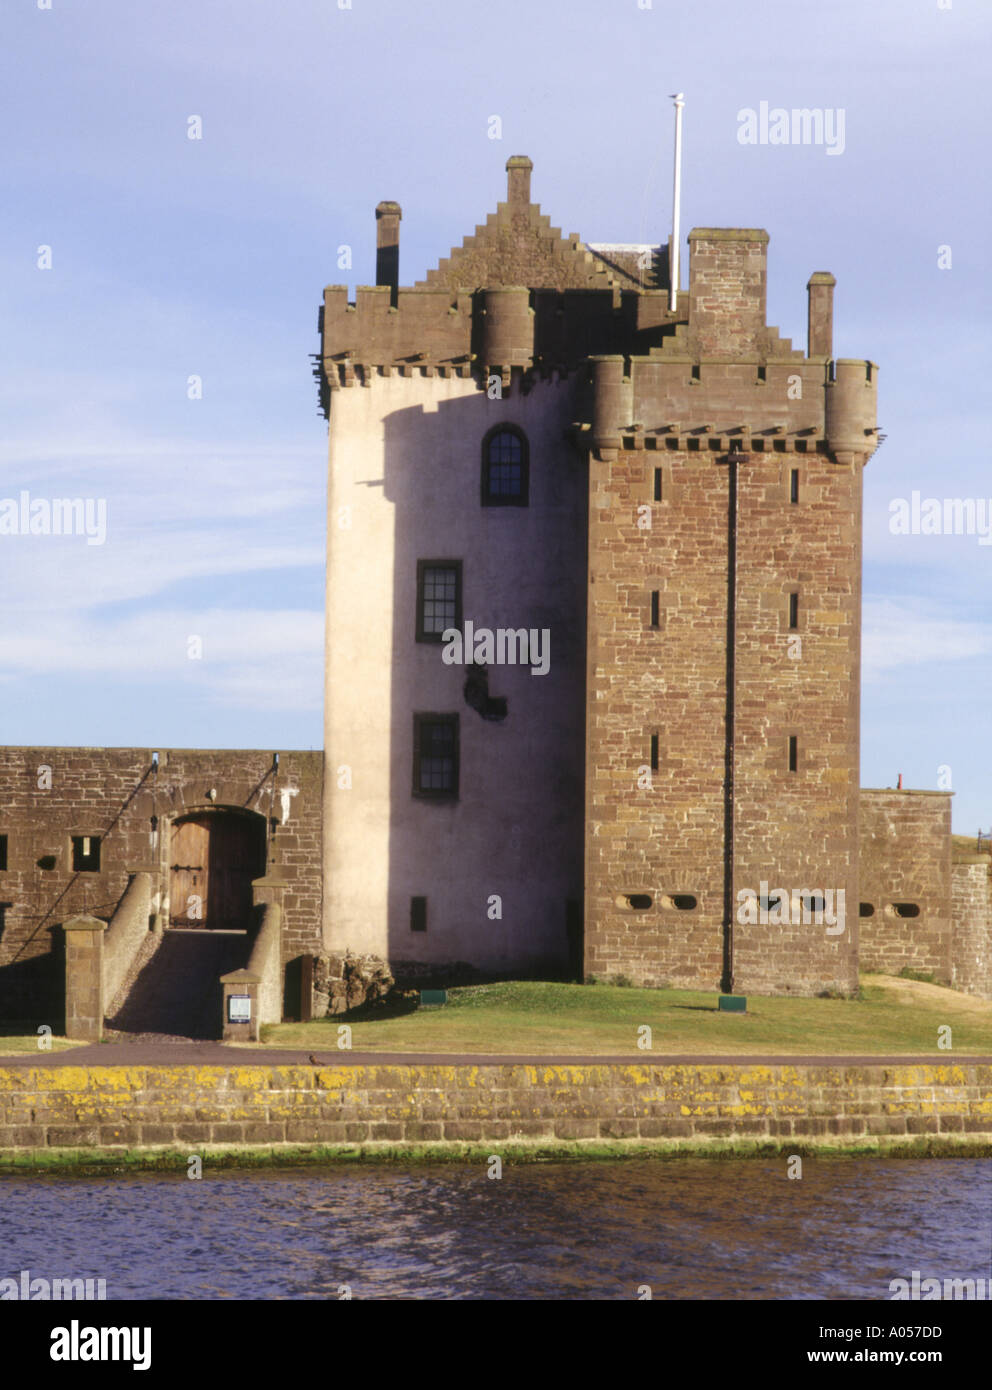 dh Broughty Ferry castle BROUGHTY FERRY ANGUS Scotland dundee Castle entrance towers Whaling museum battery barracks Stock Photo